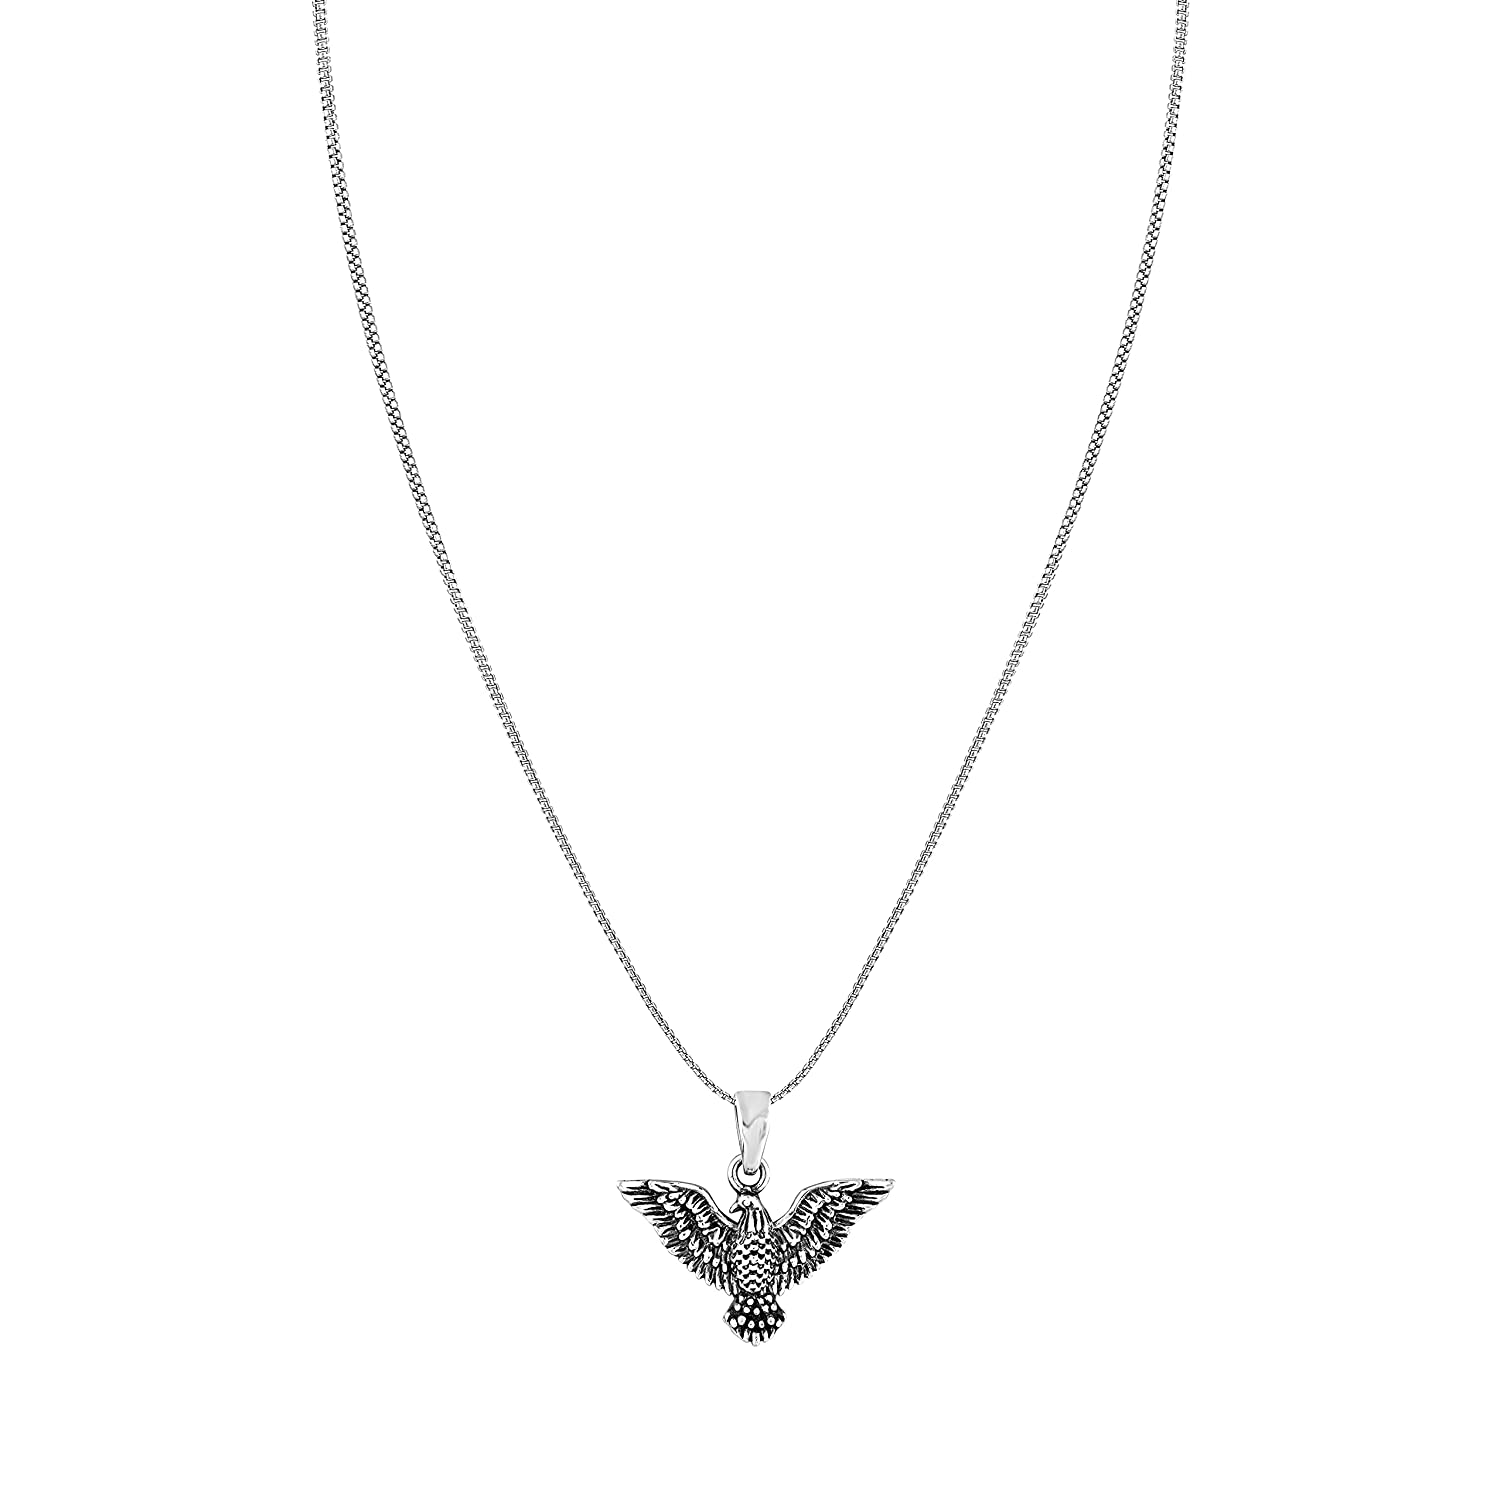 Buy 925 Silver Oxidized Eagle Pendant Necklace for Men and Boys ...